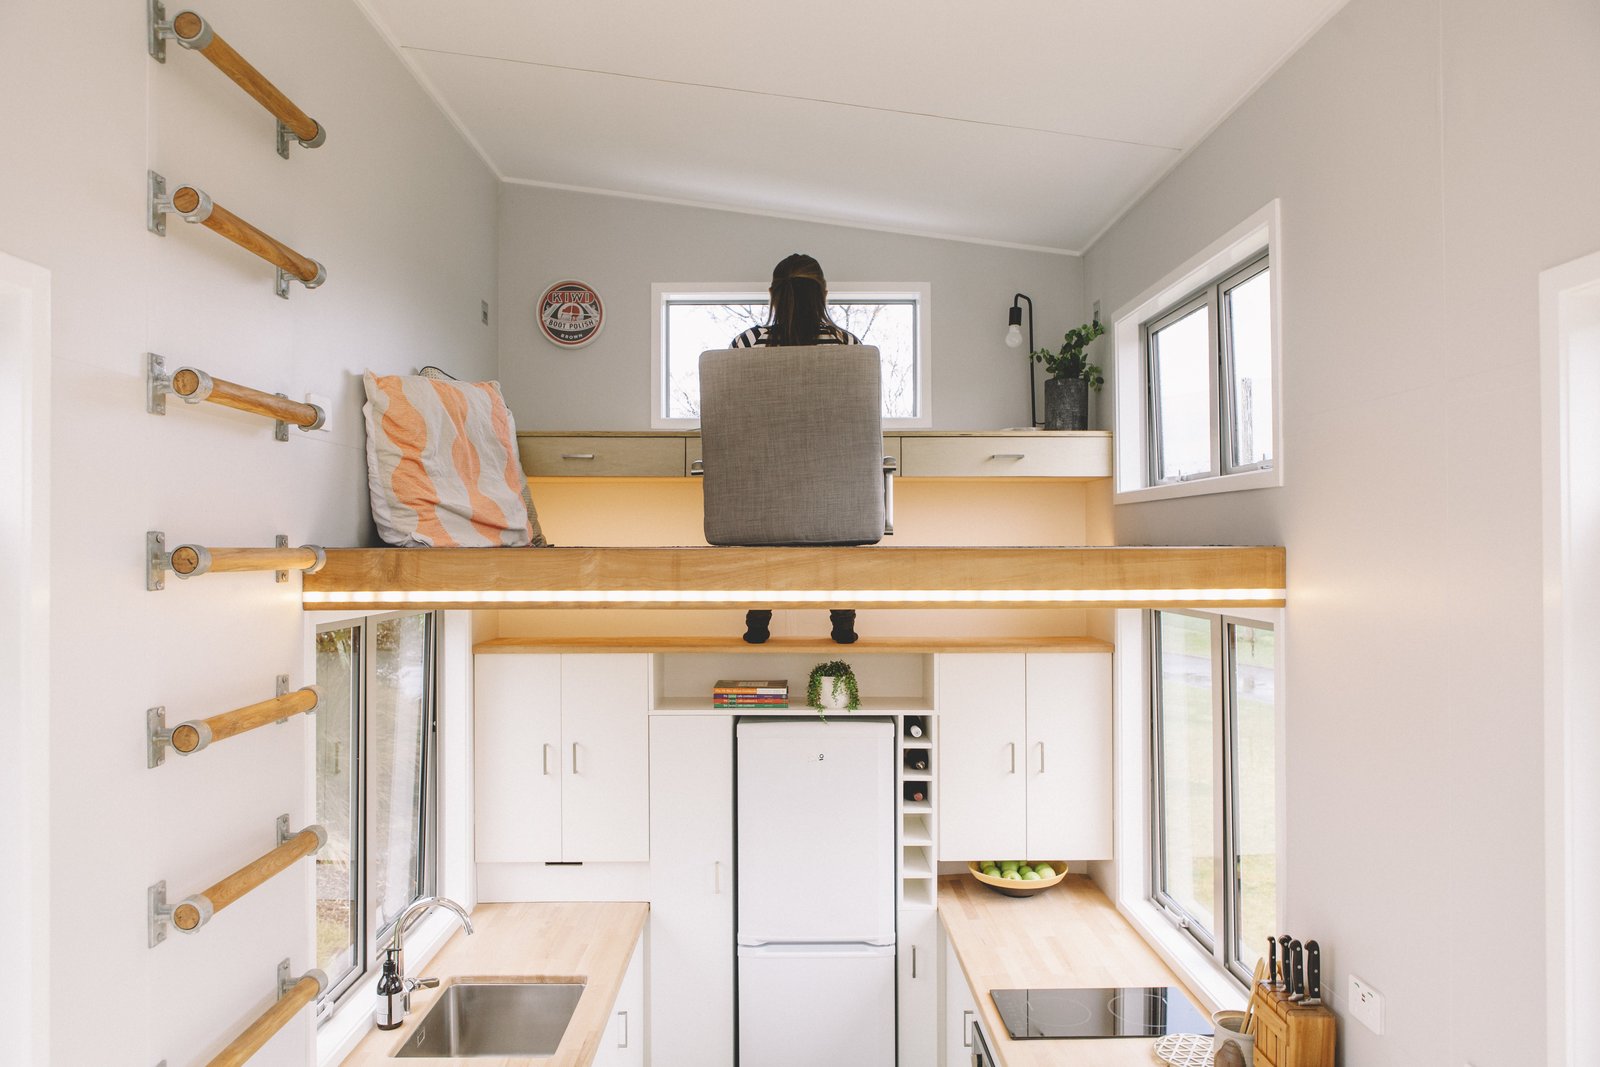 4 Brilliant Small Space Solutions Inspired by Tiny Homes